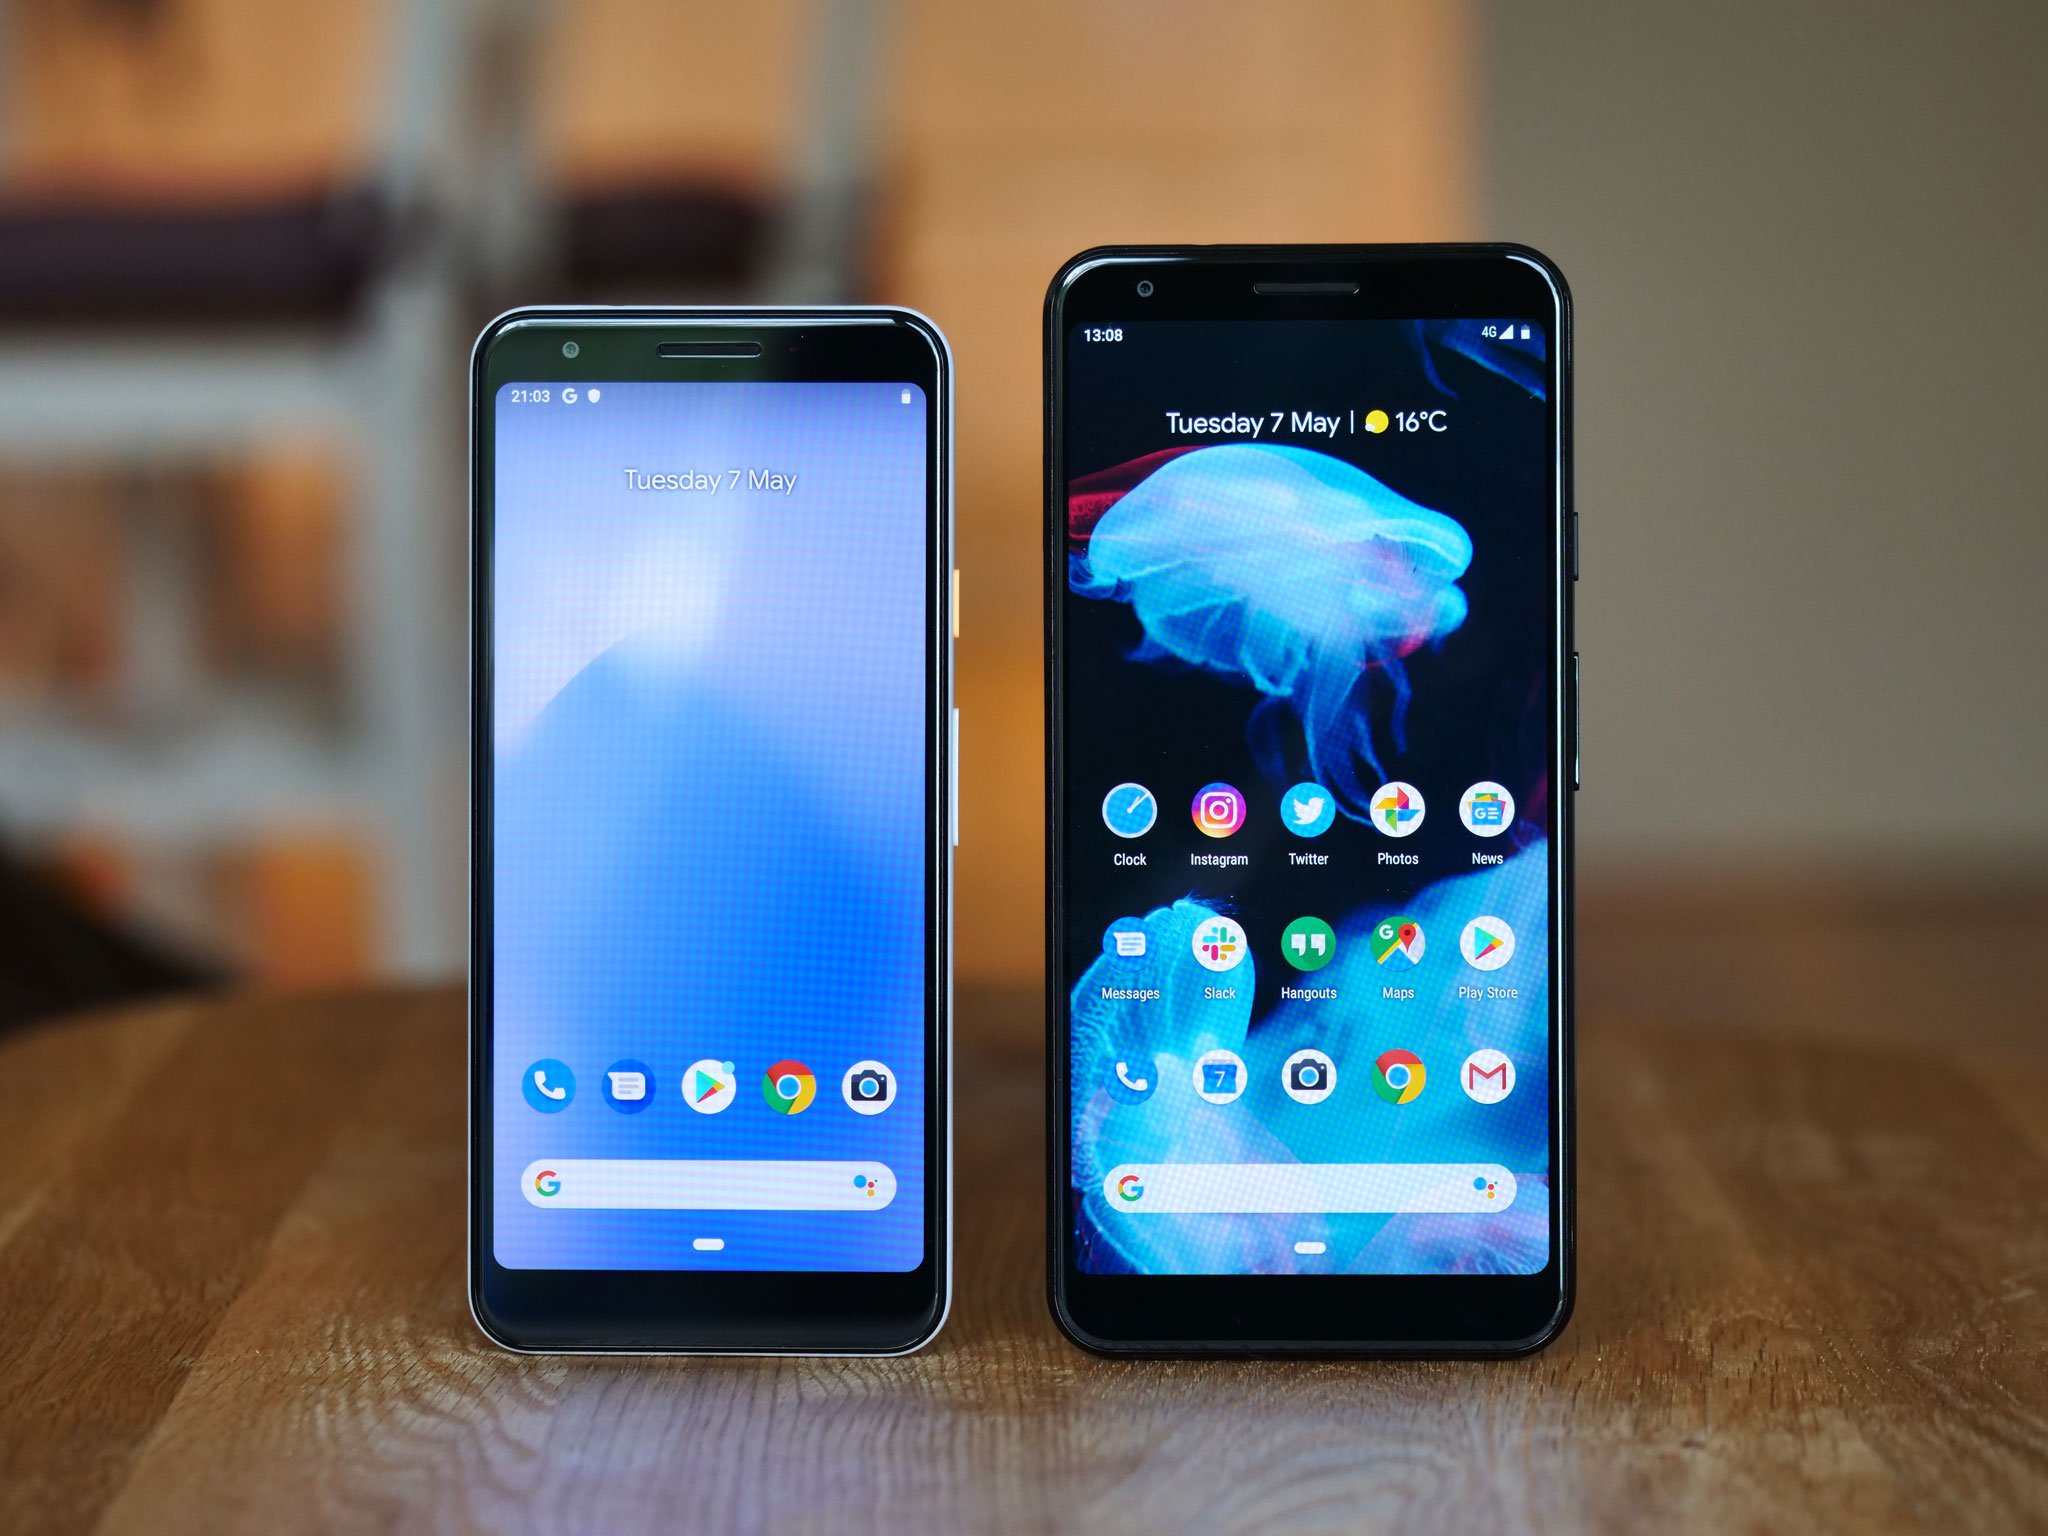 Google Pixel 3a vs. Pixel 3a XL: Which should you buy? | Android